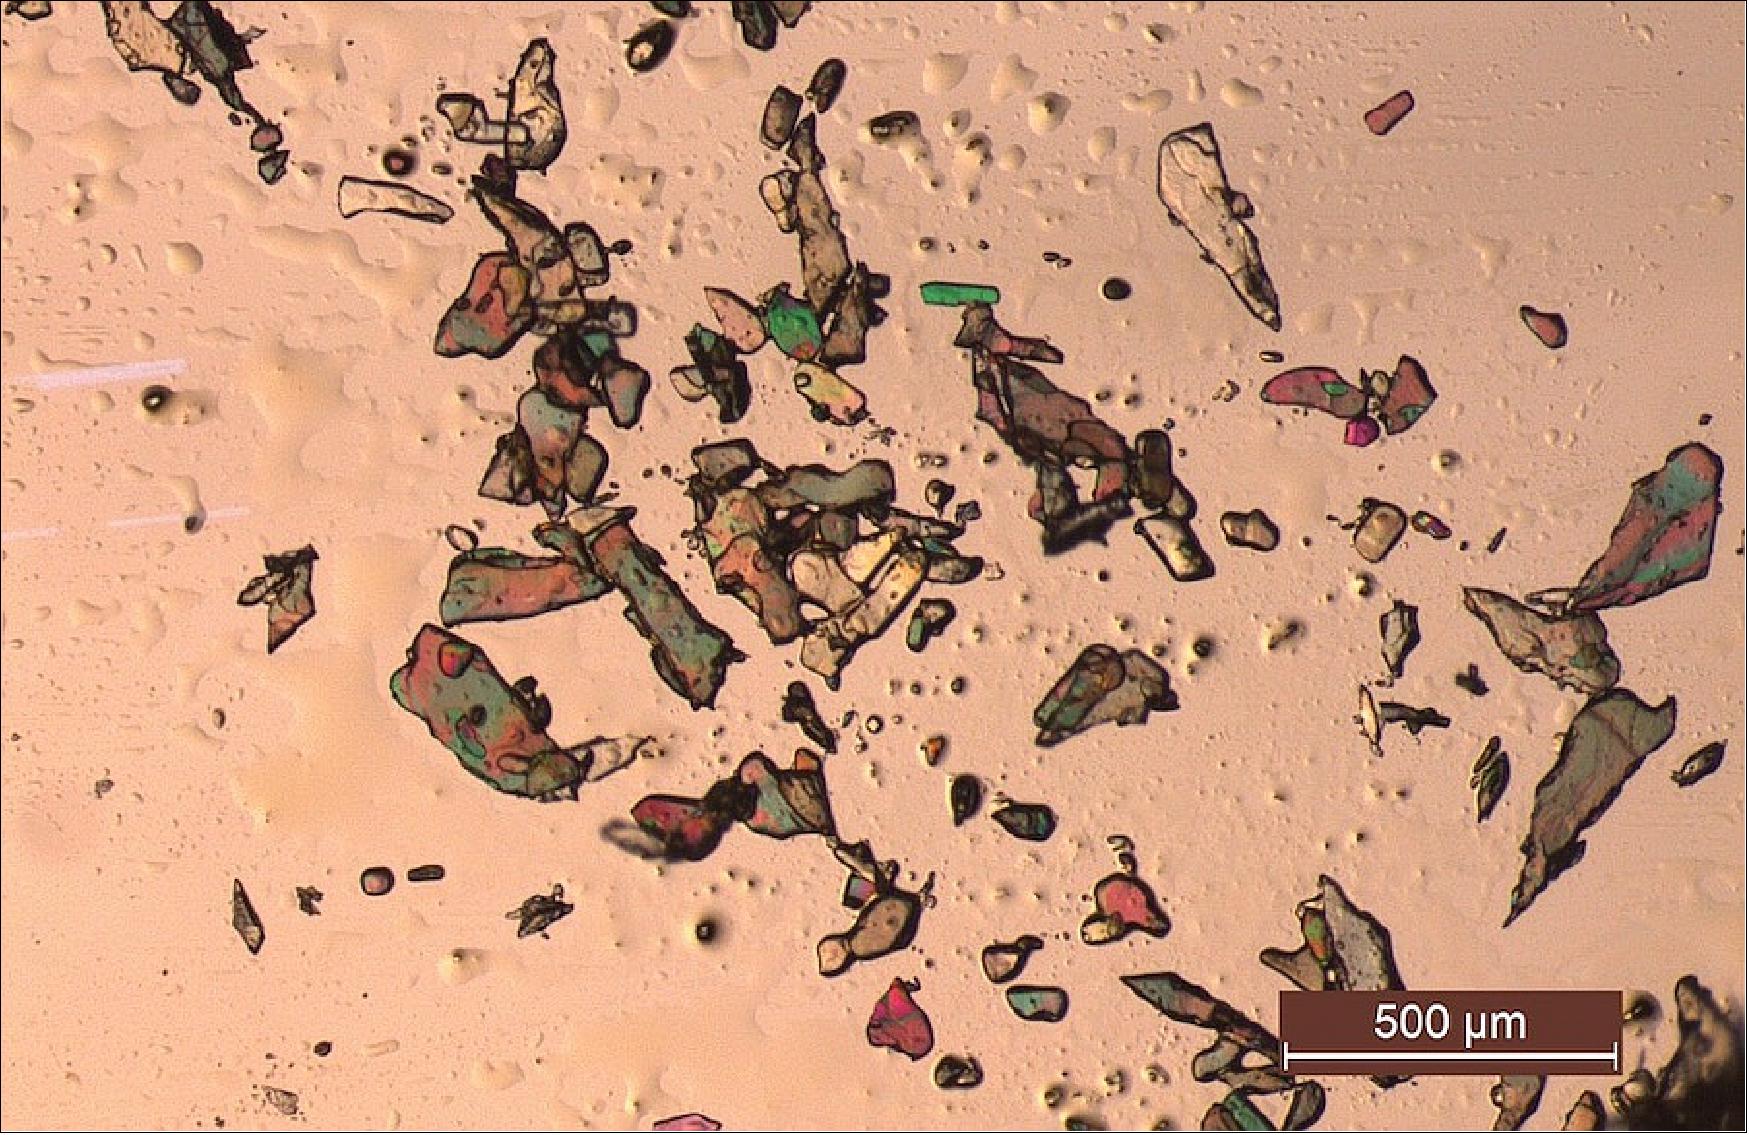 Figure 59: Crystals of acetaldehyde phenylhydrazone appear colorful when exposed to polarized light under a microscope (image credit: Terry Threlfall)